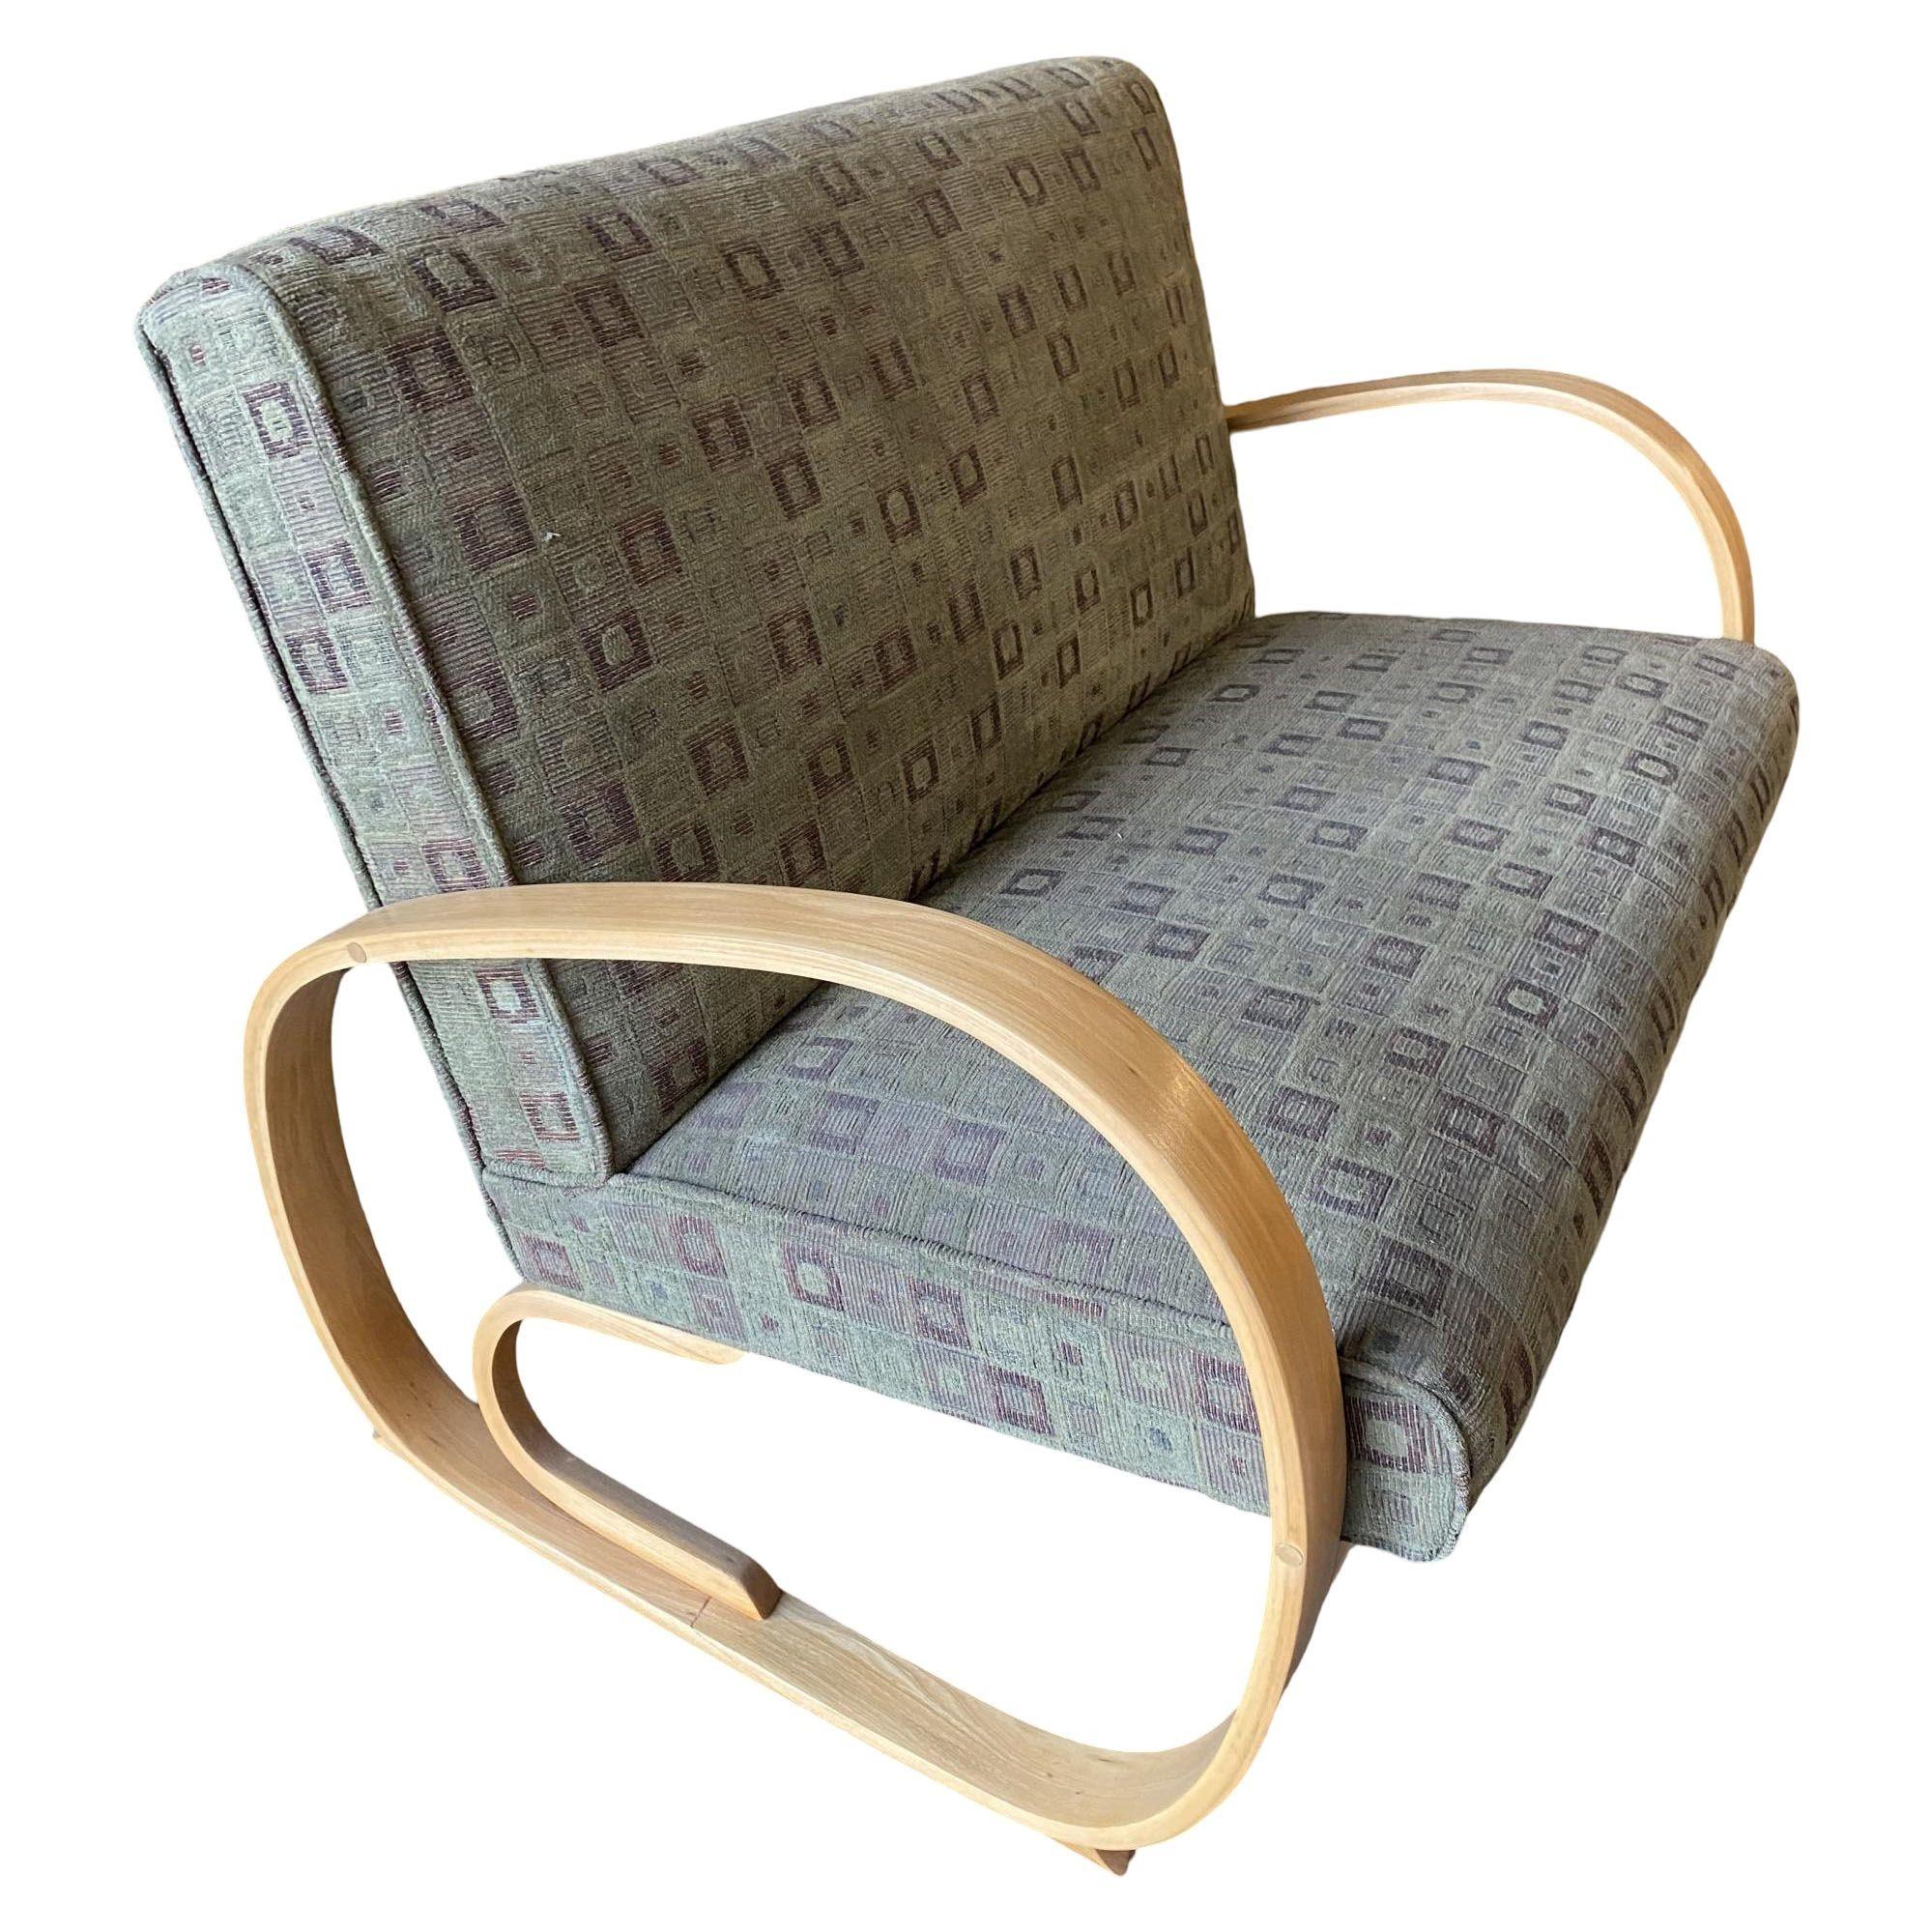 Gilbert Rohde designed streamline settee and lounge chair featuring a matching set both with a floating set and shaped Art Deco speed arms.

Measurements
Settee: 45